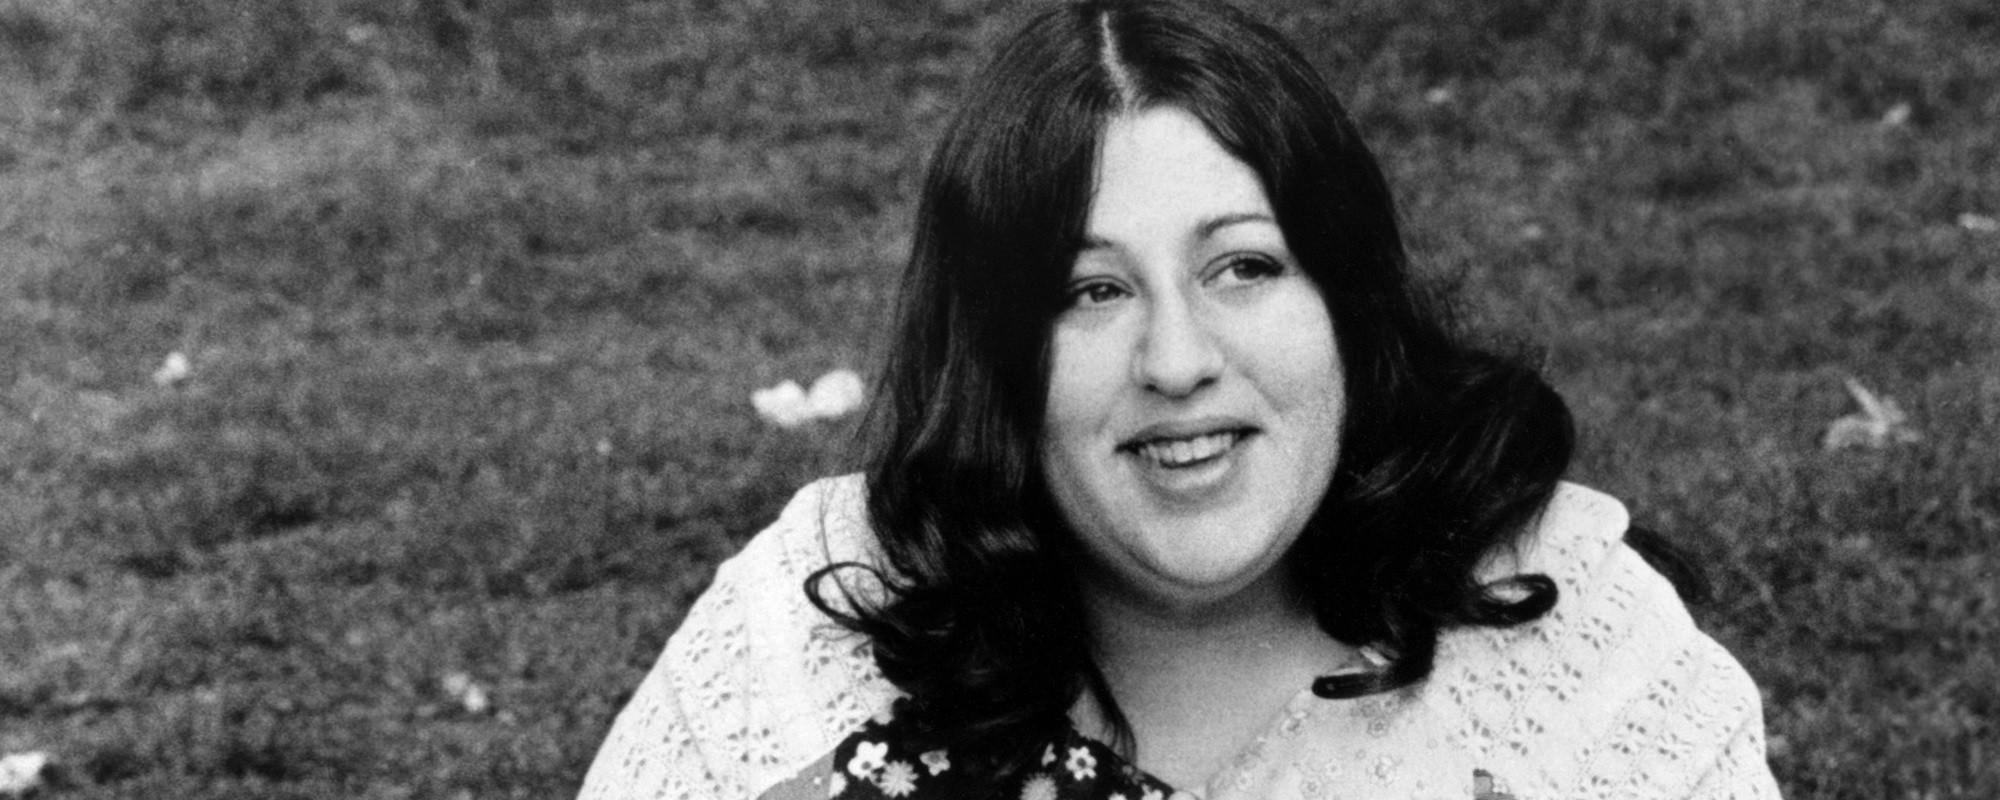 Cass Elliot’s Daughter Sets the Record Straight on Mother’s Death, Sandwich Myth